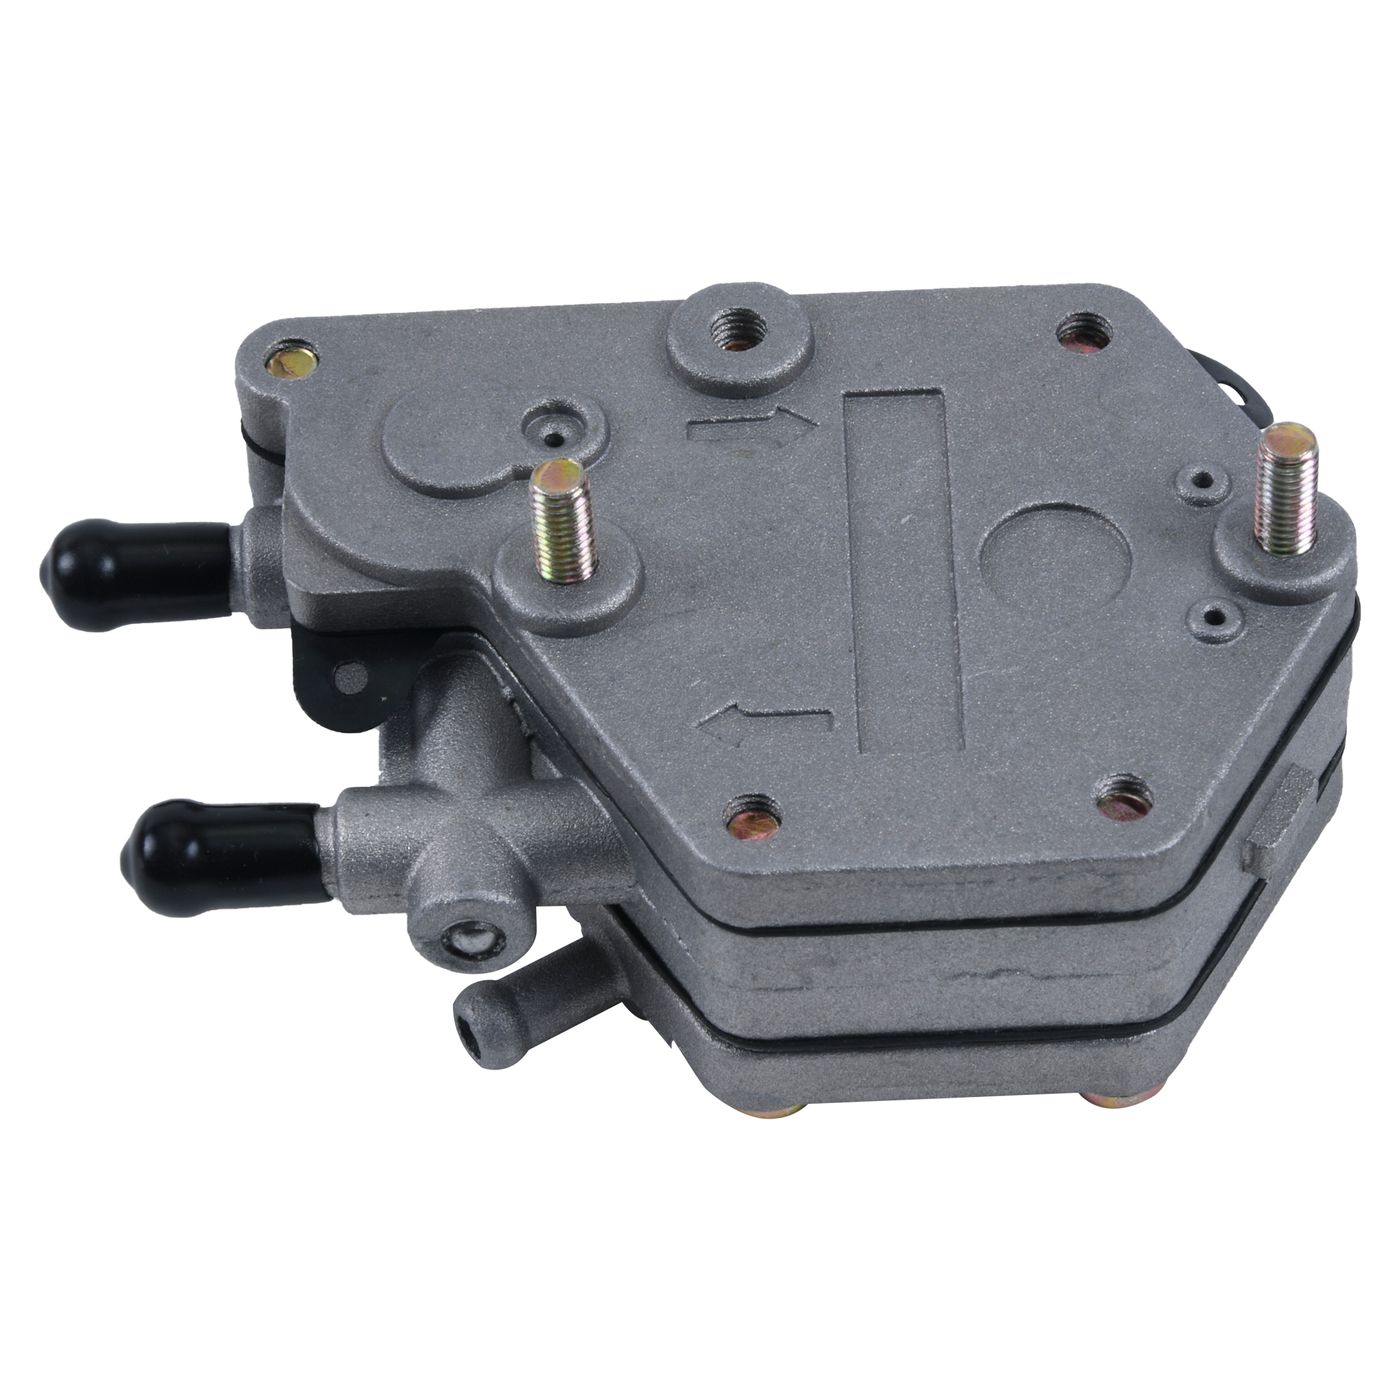 Wrp Fuel Pumps - WRP475004 image